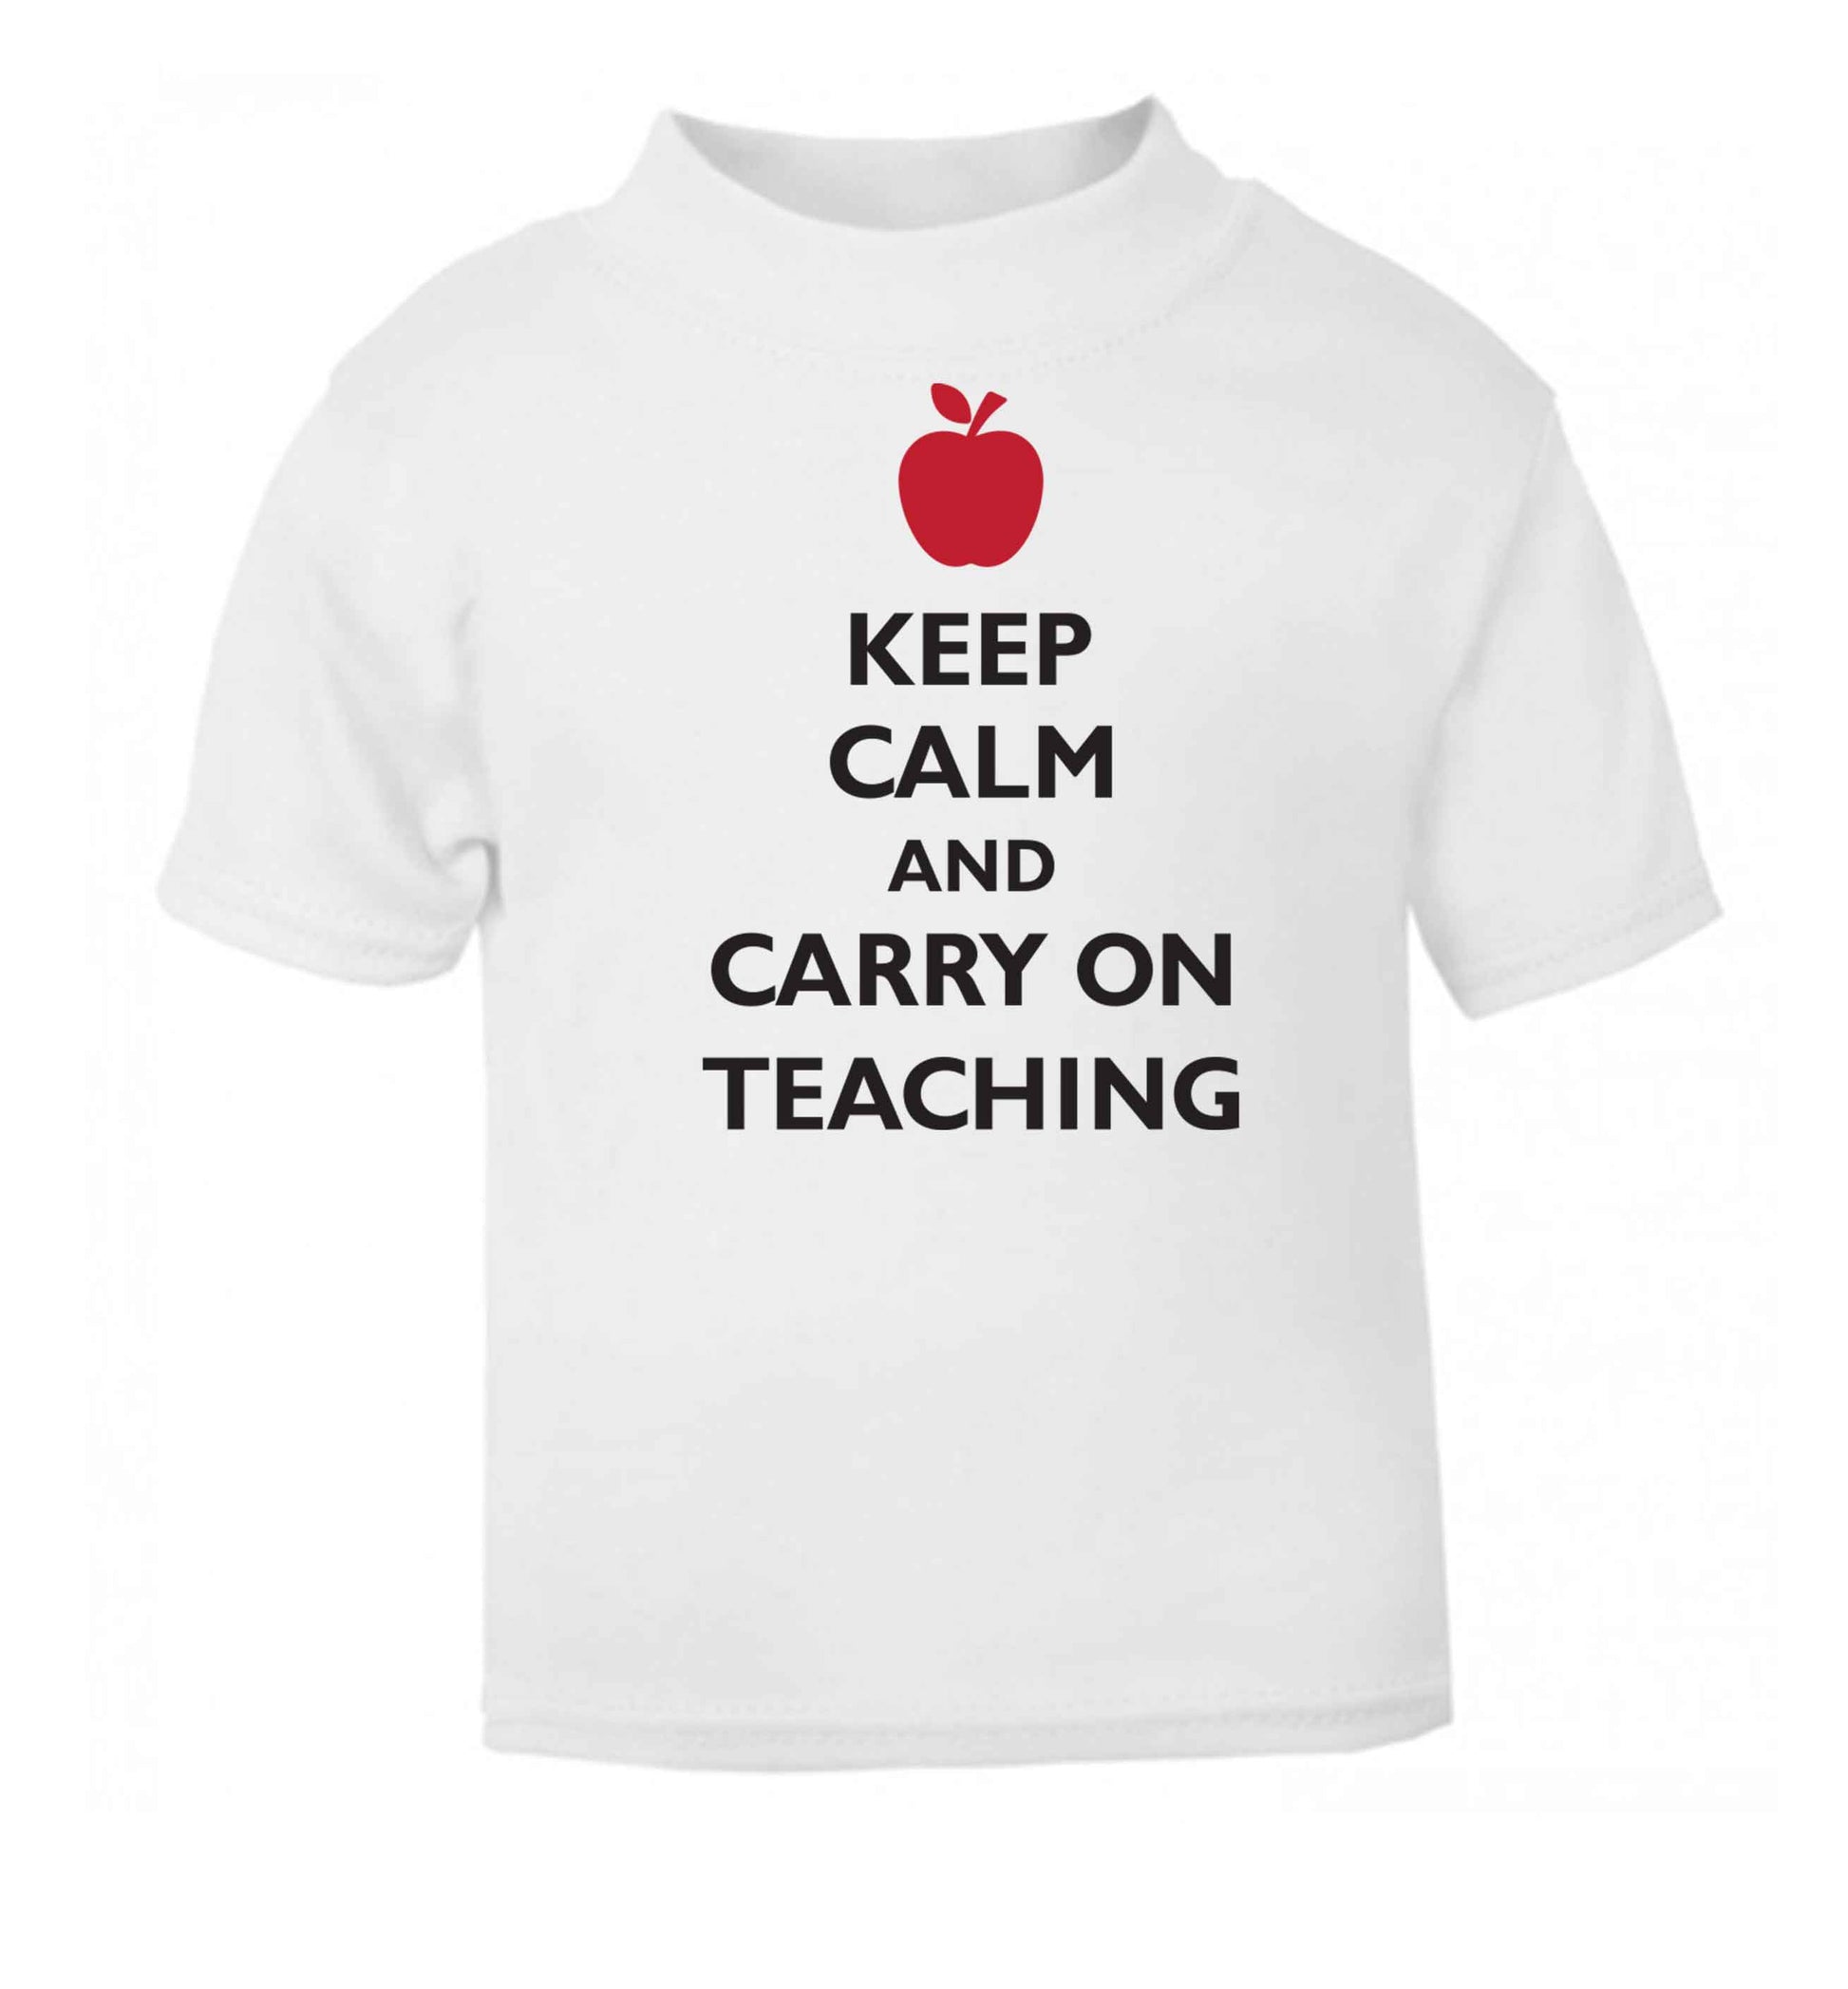 Keep calm and carry on teaching white baby toddler Tshirt 2 Years